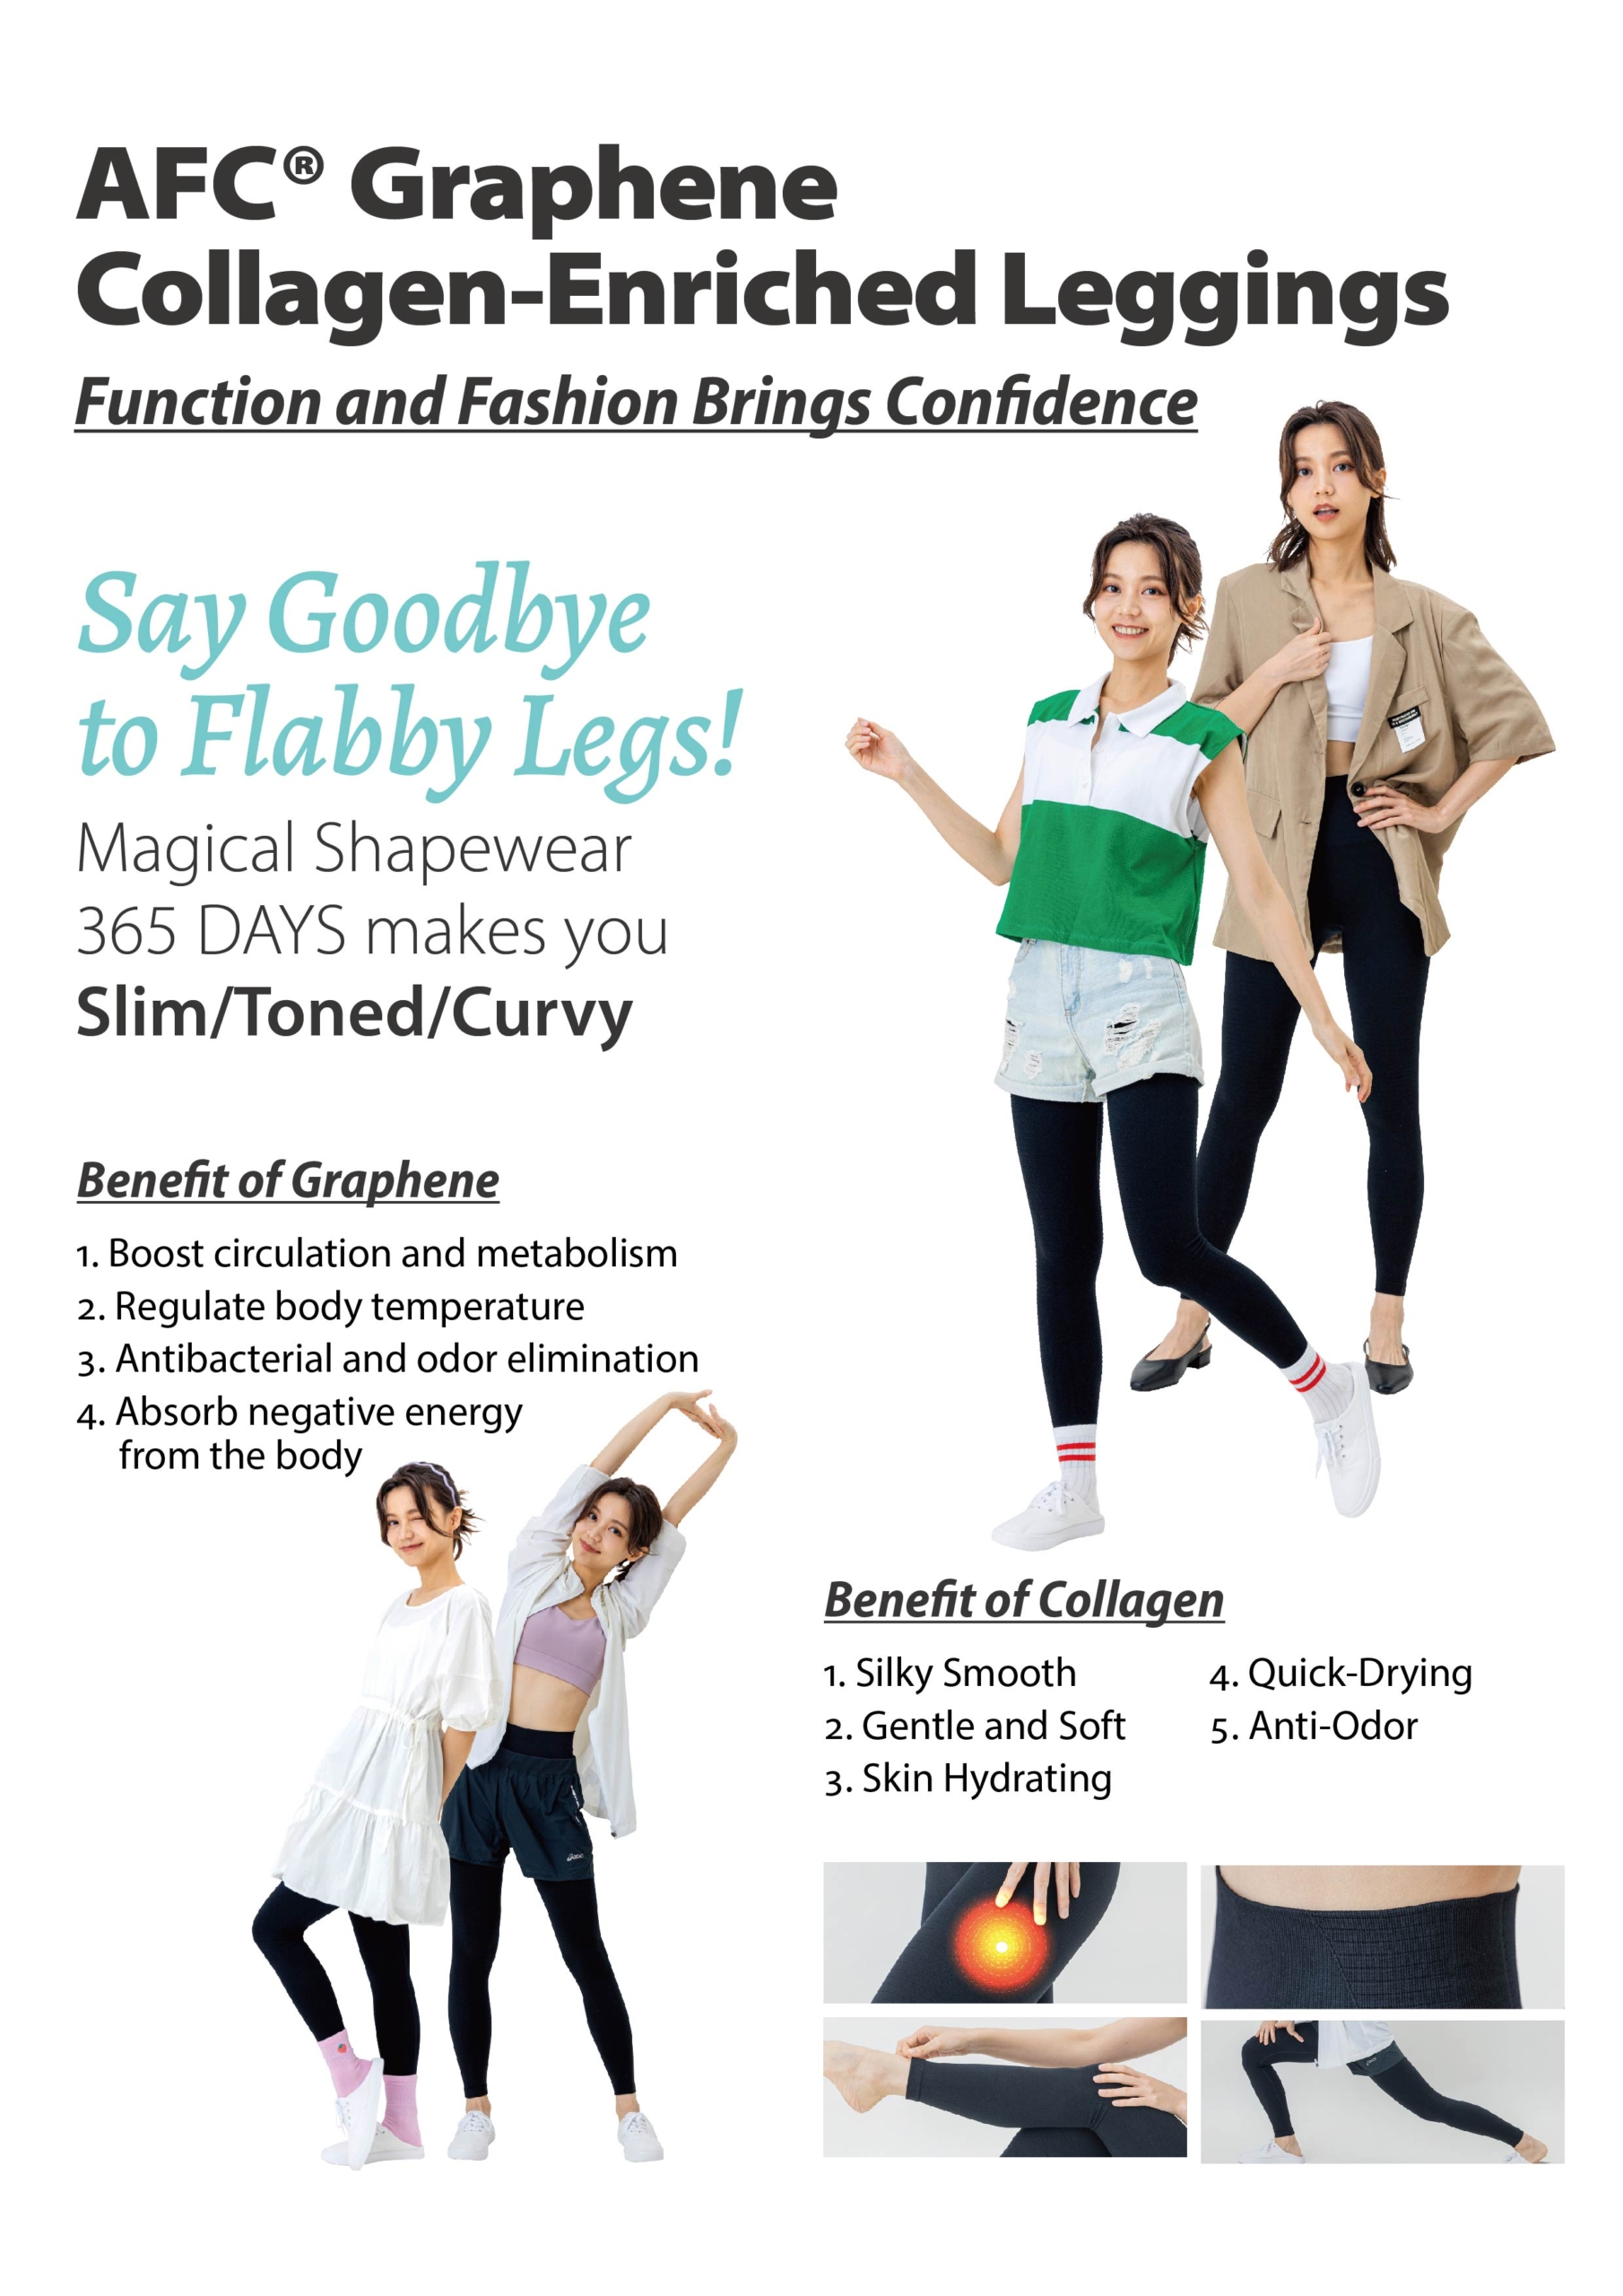 Graphene Leggings, say goodbye to flabby legs. magical shapewear for a slim, toned and curvy body all year long